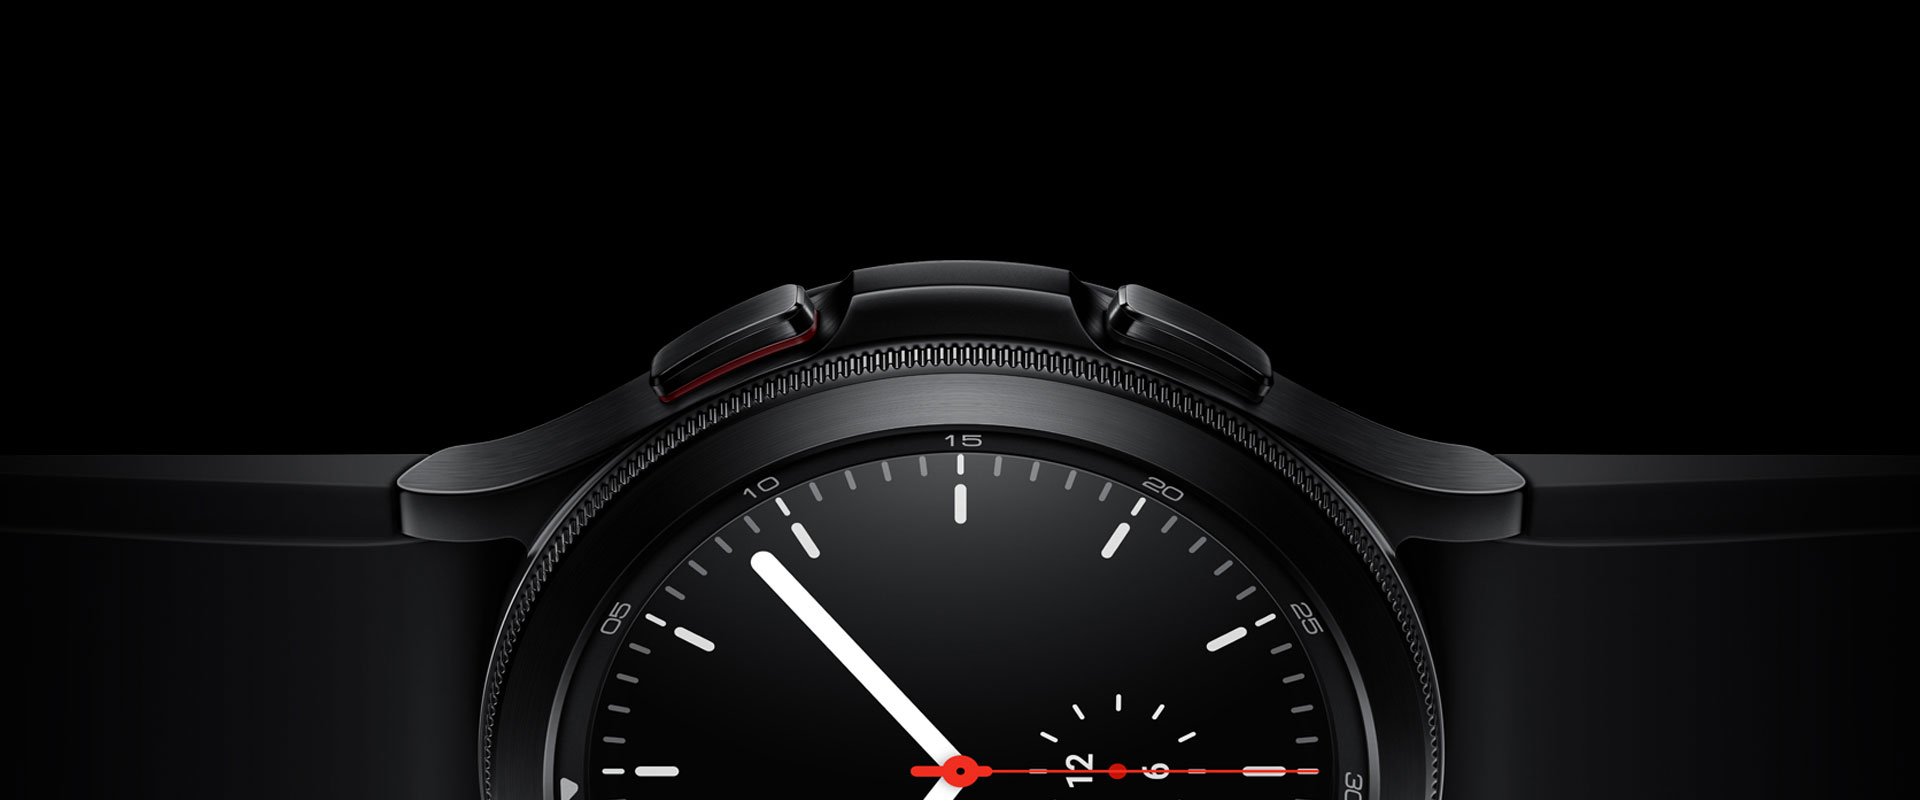 The half side of the watch face of a black Galaxy Watch4 Classic is prominently displayed, focusing on its bezel, materials, and simple watch face screen that is showing the time.